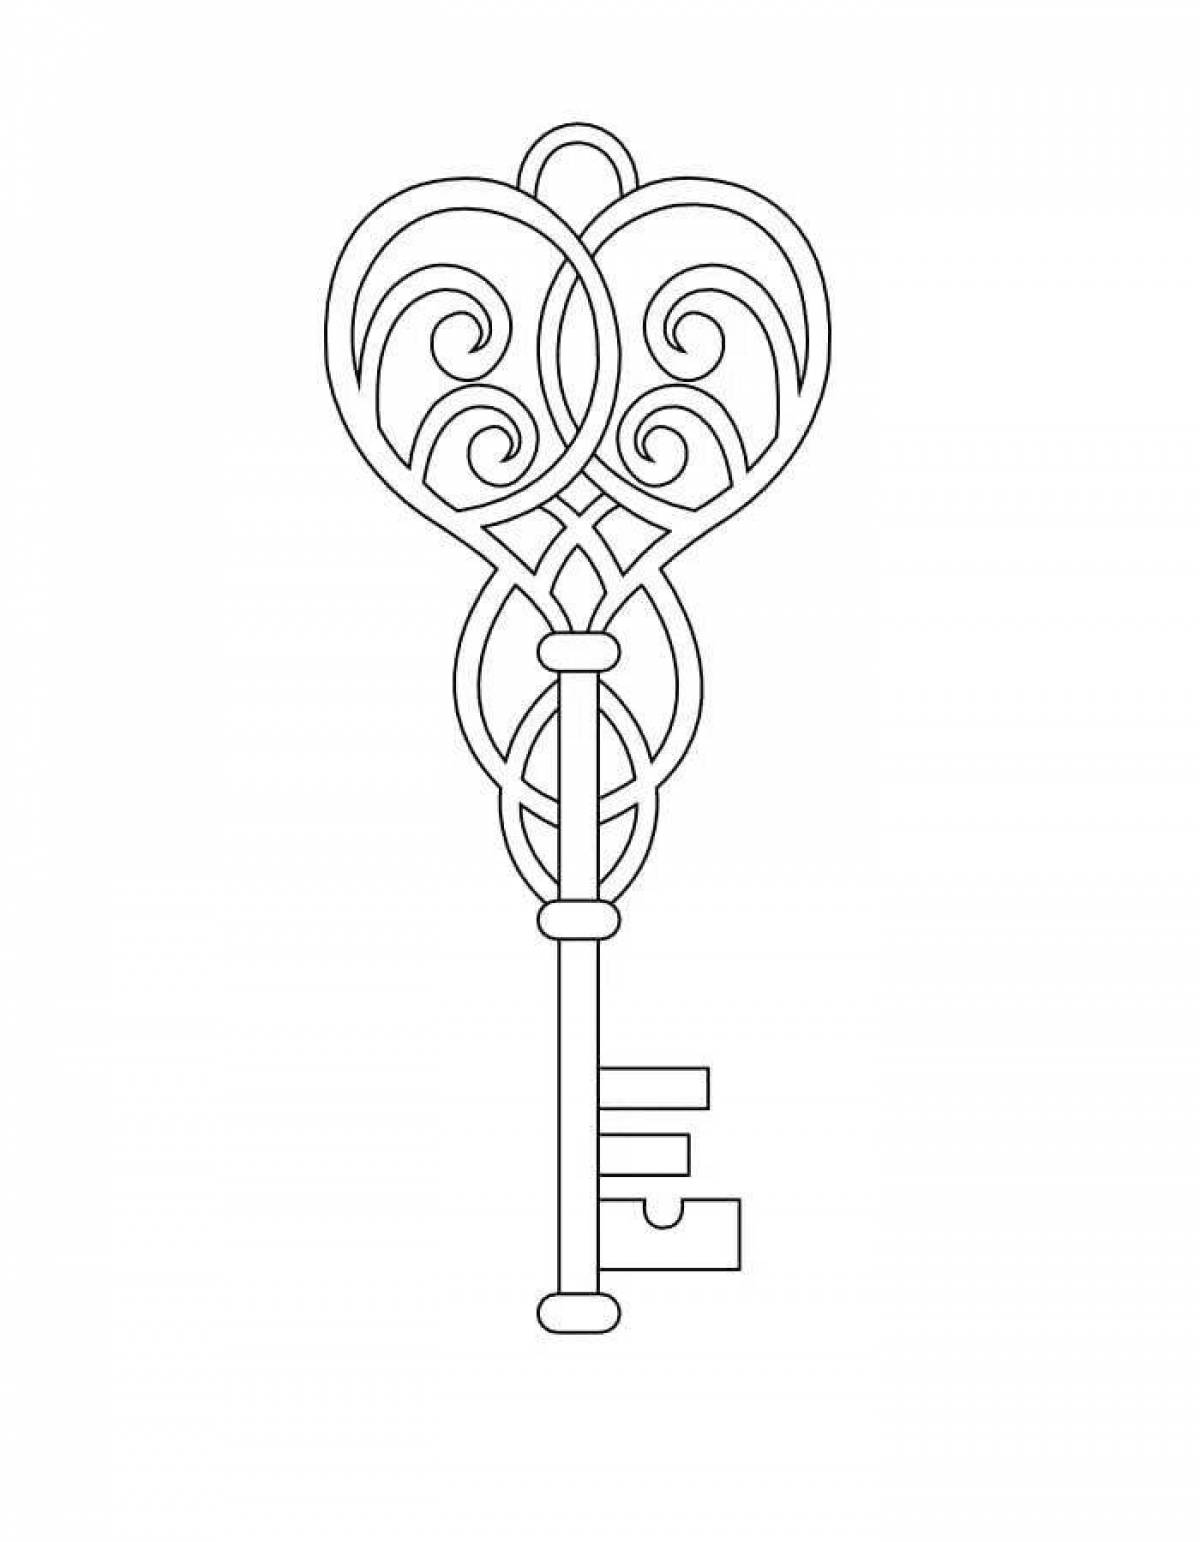 Coloring page with simple key